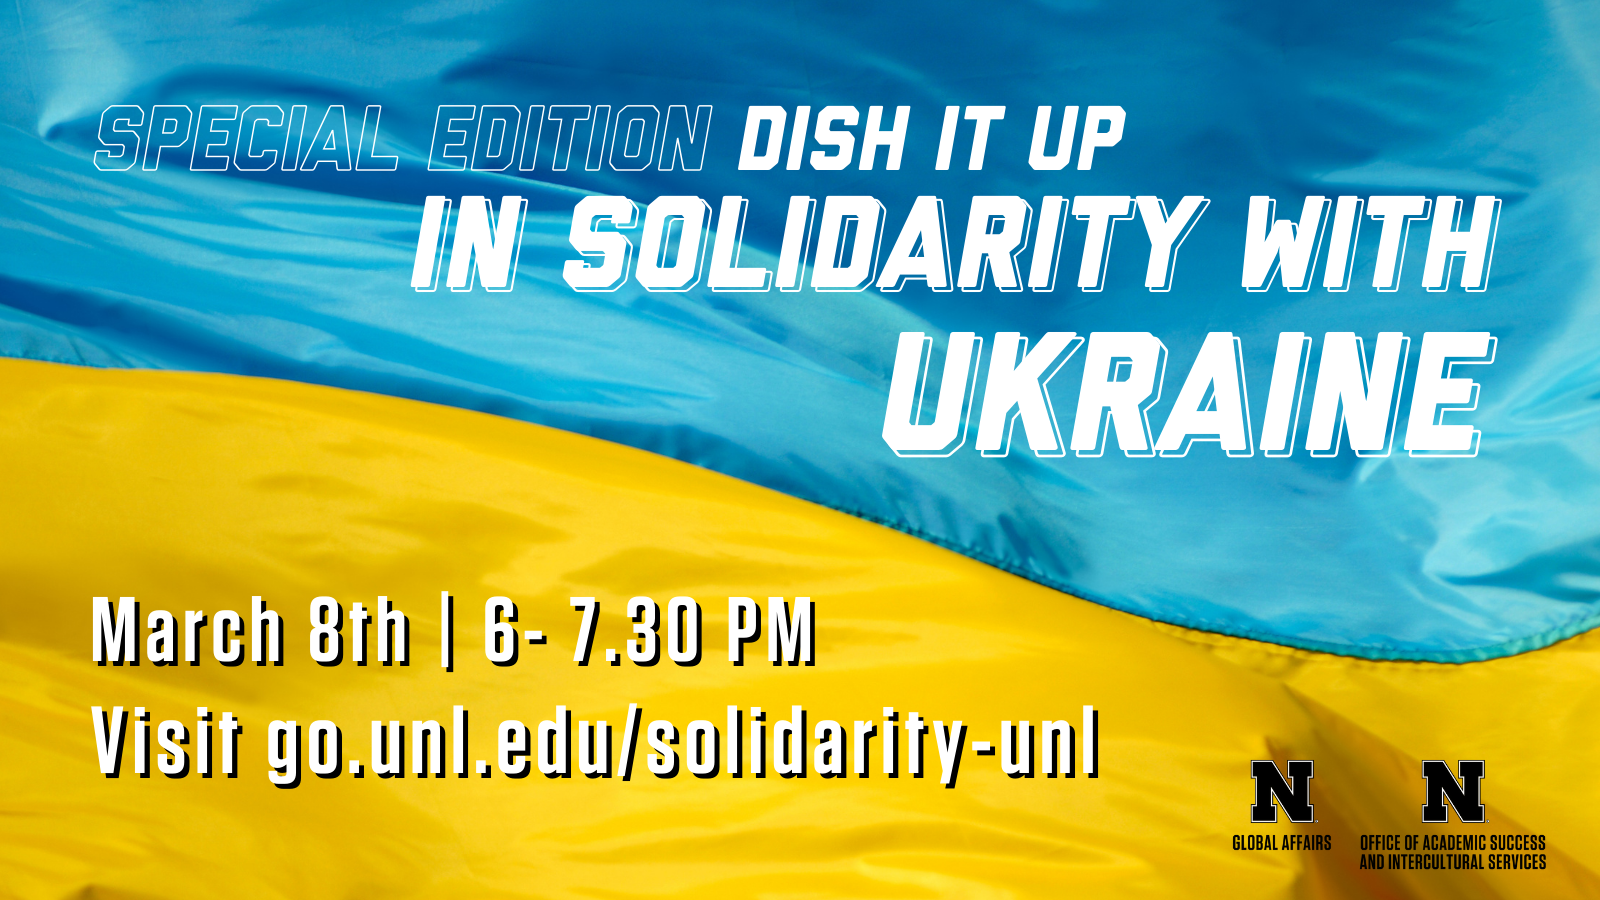 Join OASIS and ISSO for a special edition of Dish It Up, In Solidarity with Ukraine